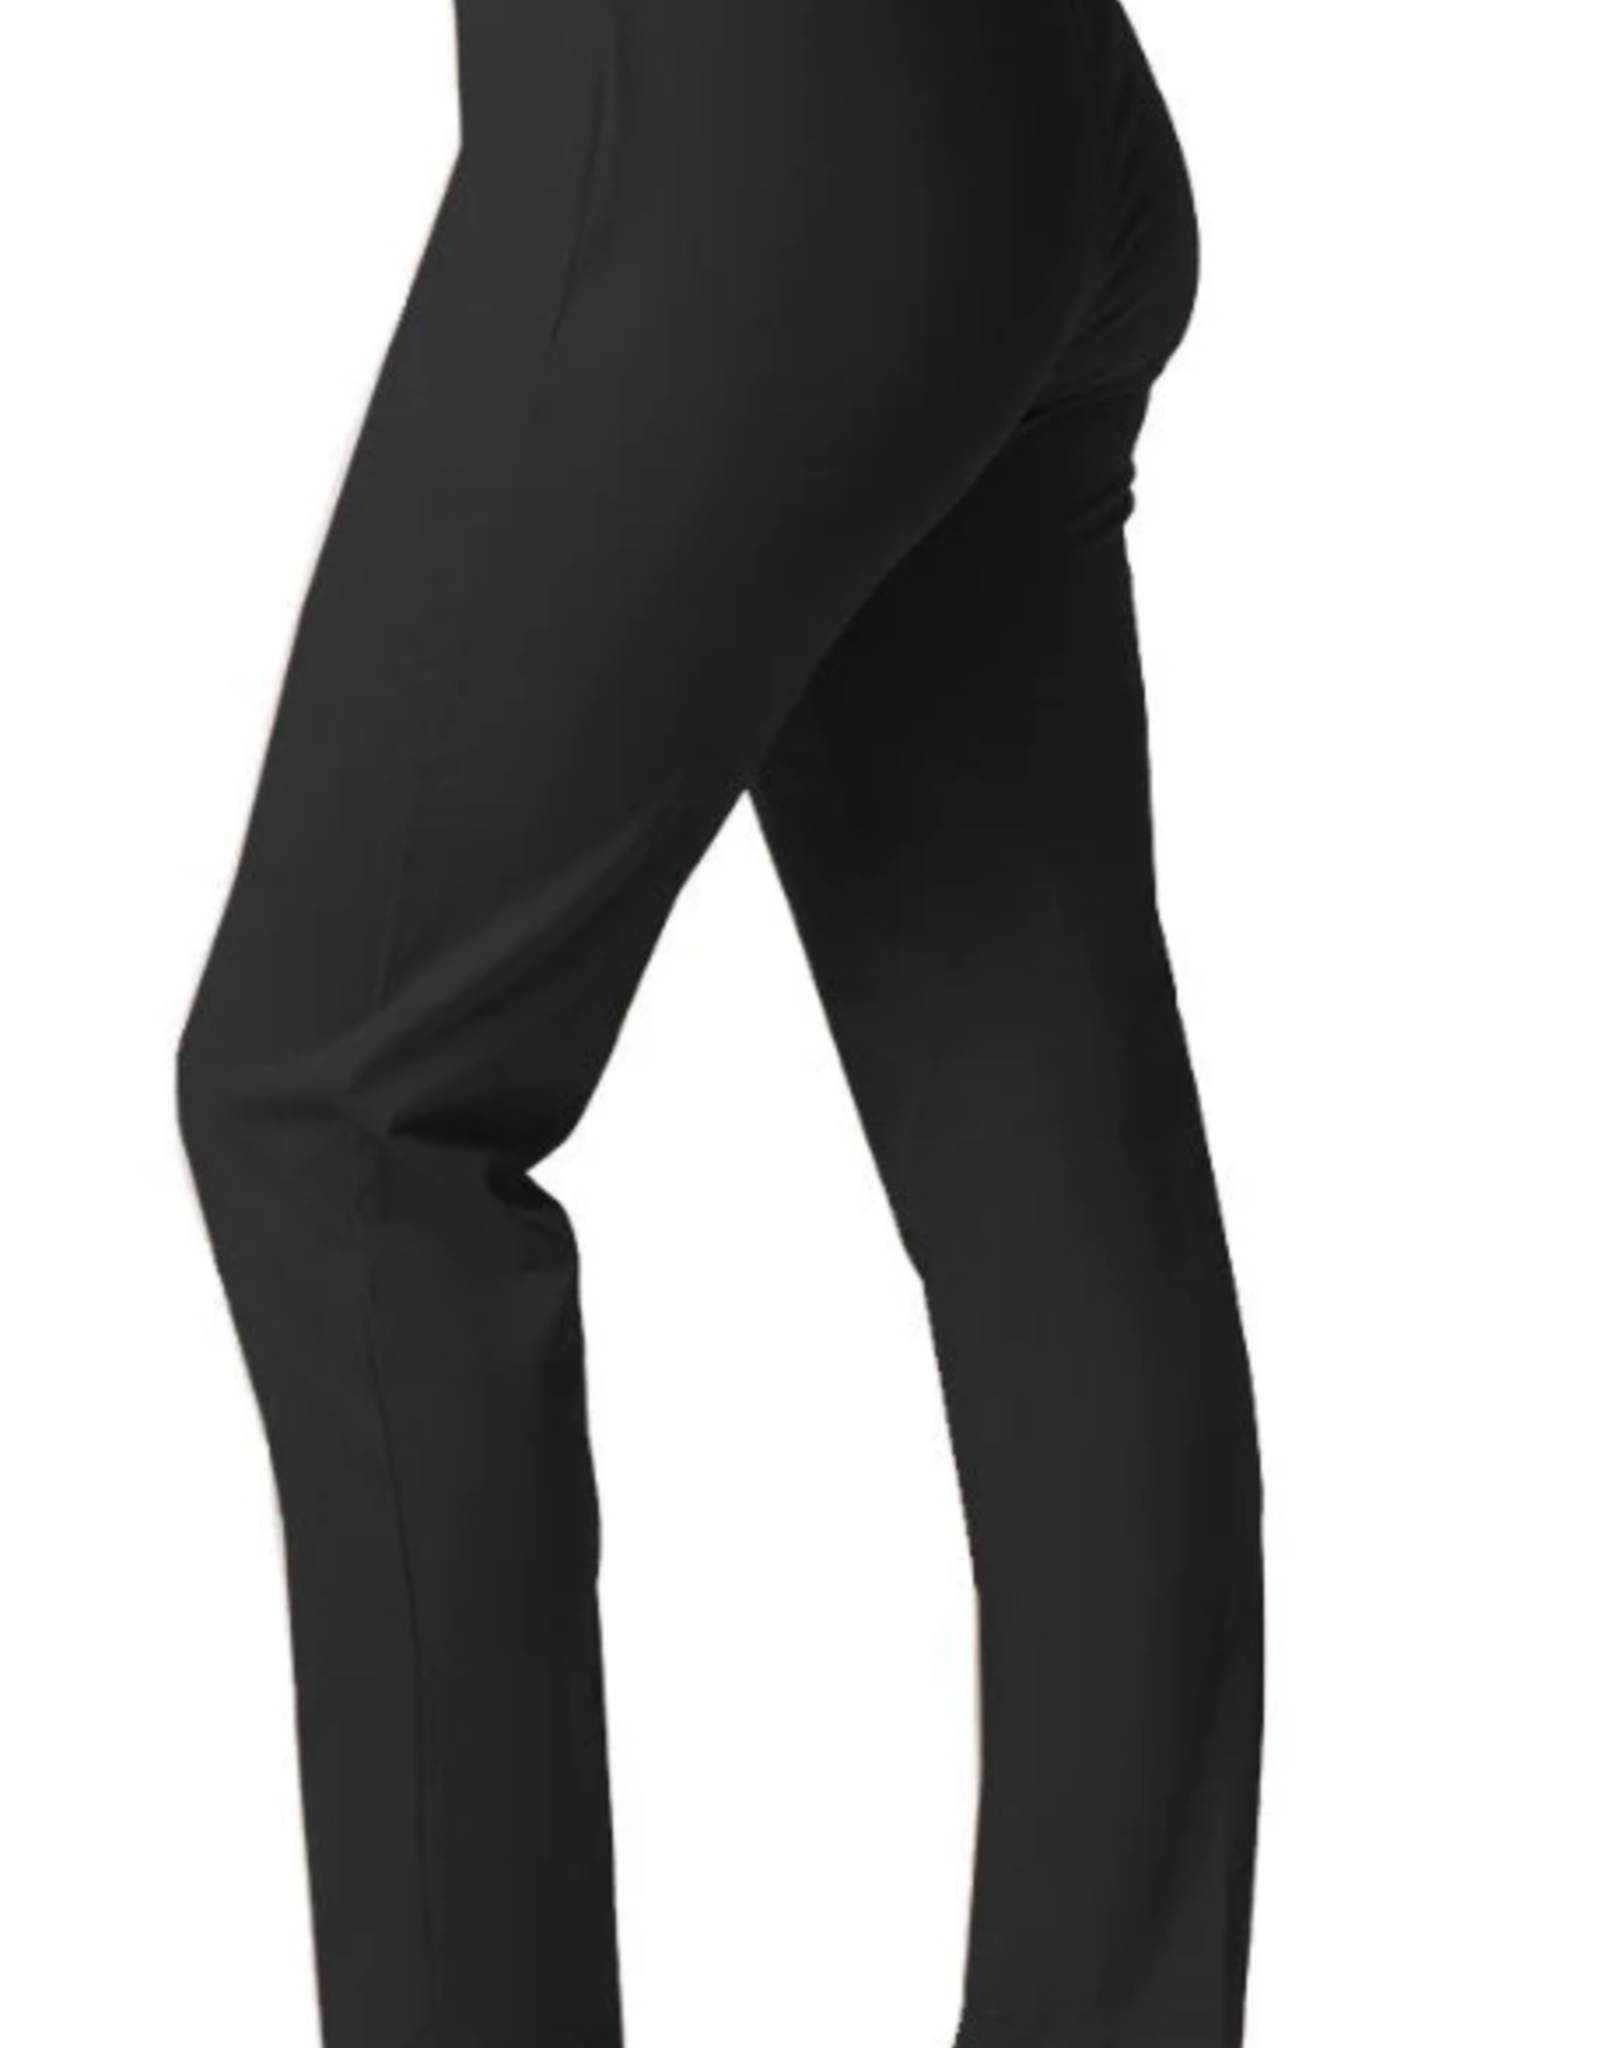 Black Wide Waist Band Pull-On-Ankle Pant